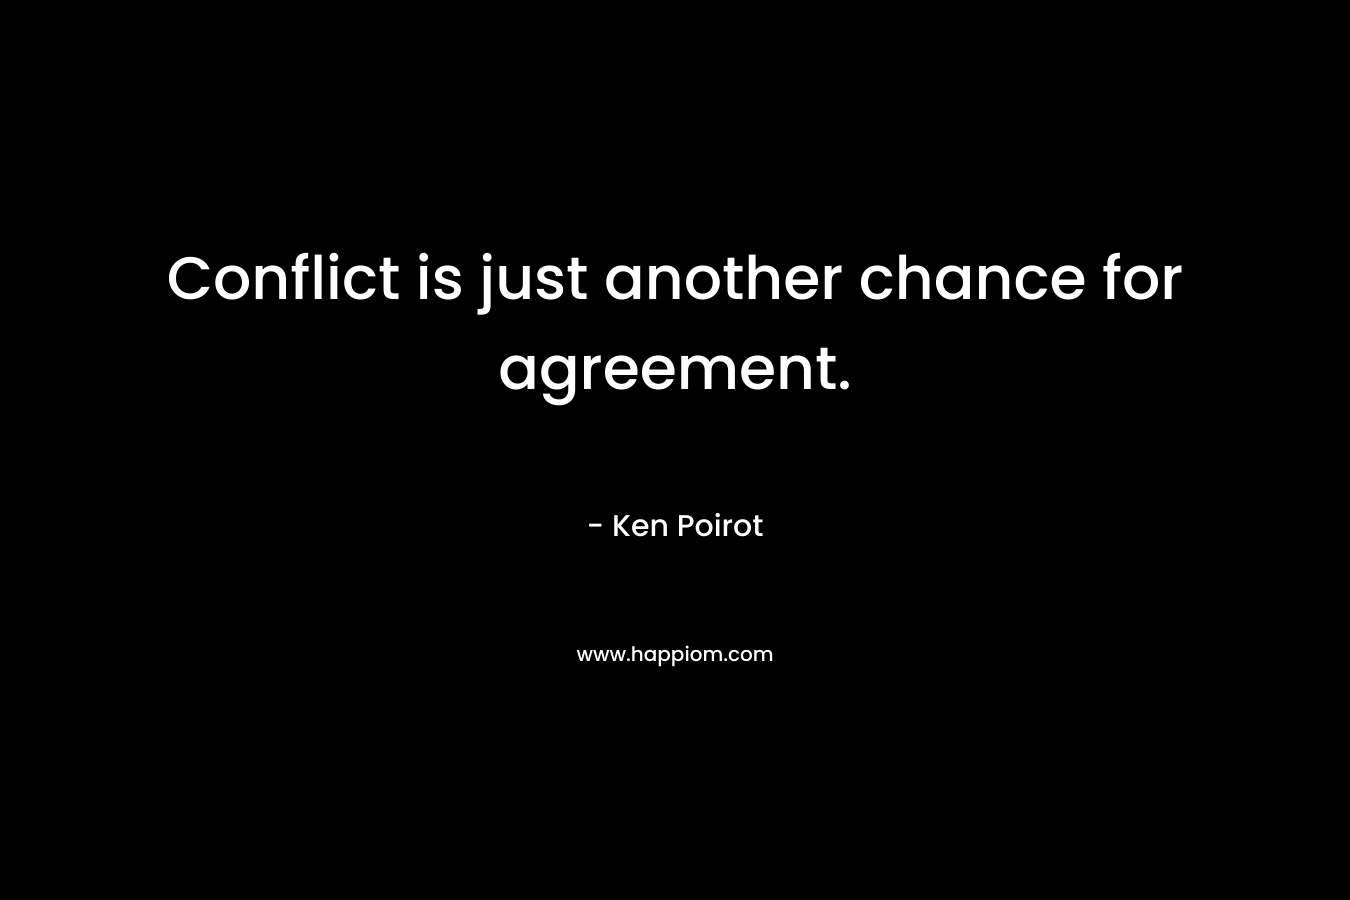 Conflict is just another chance for agreement.